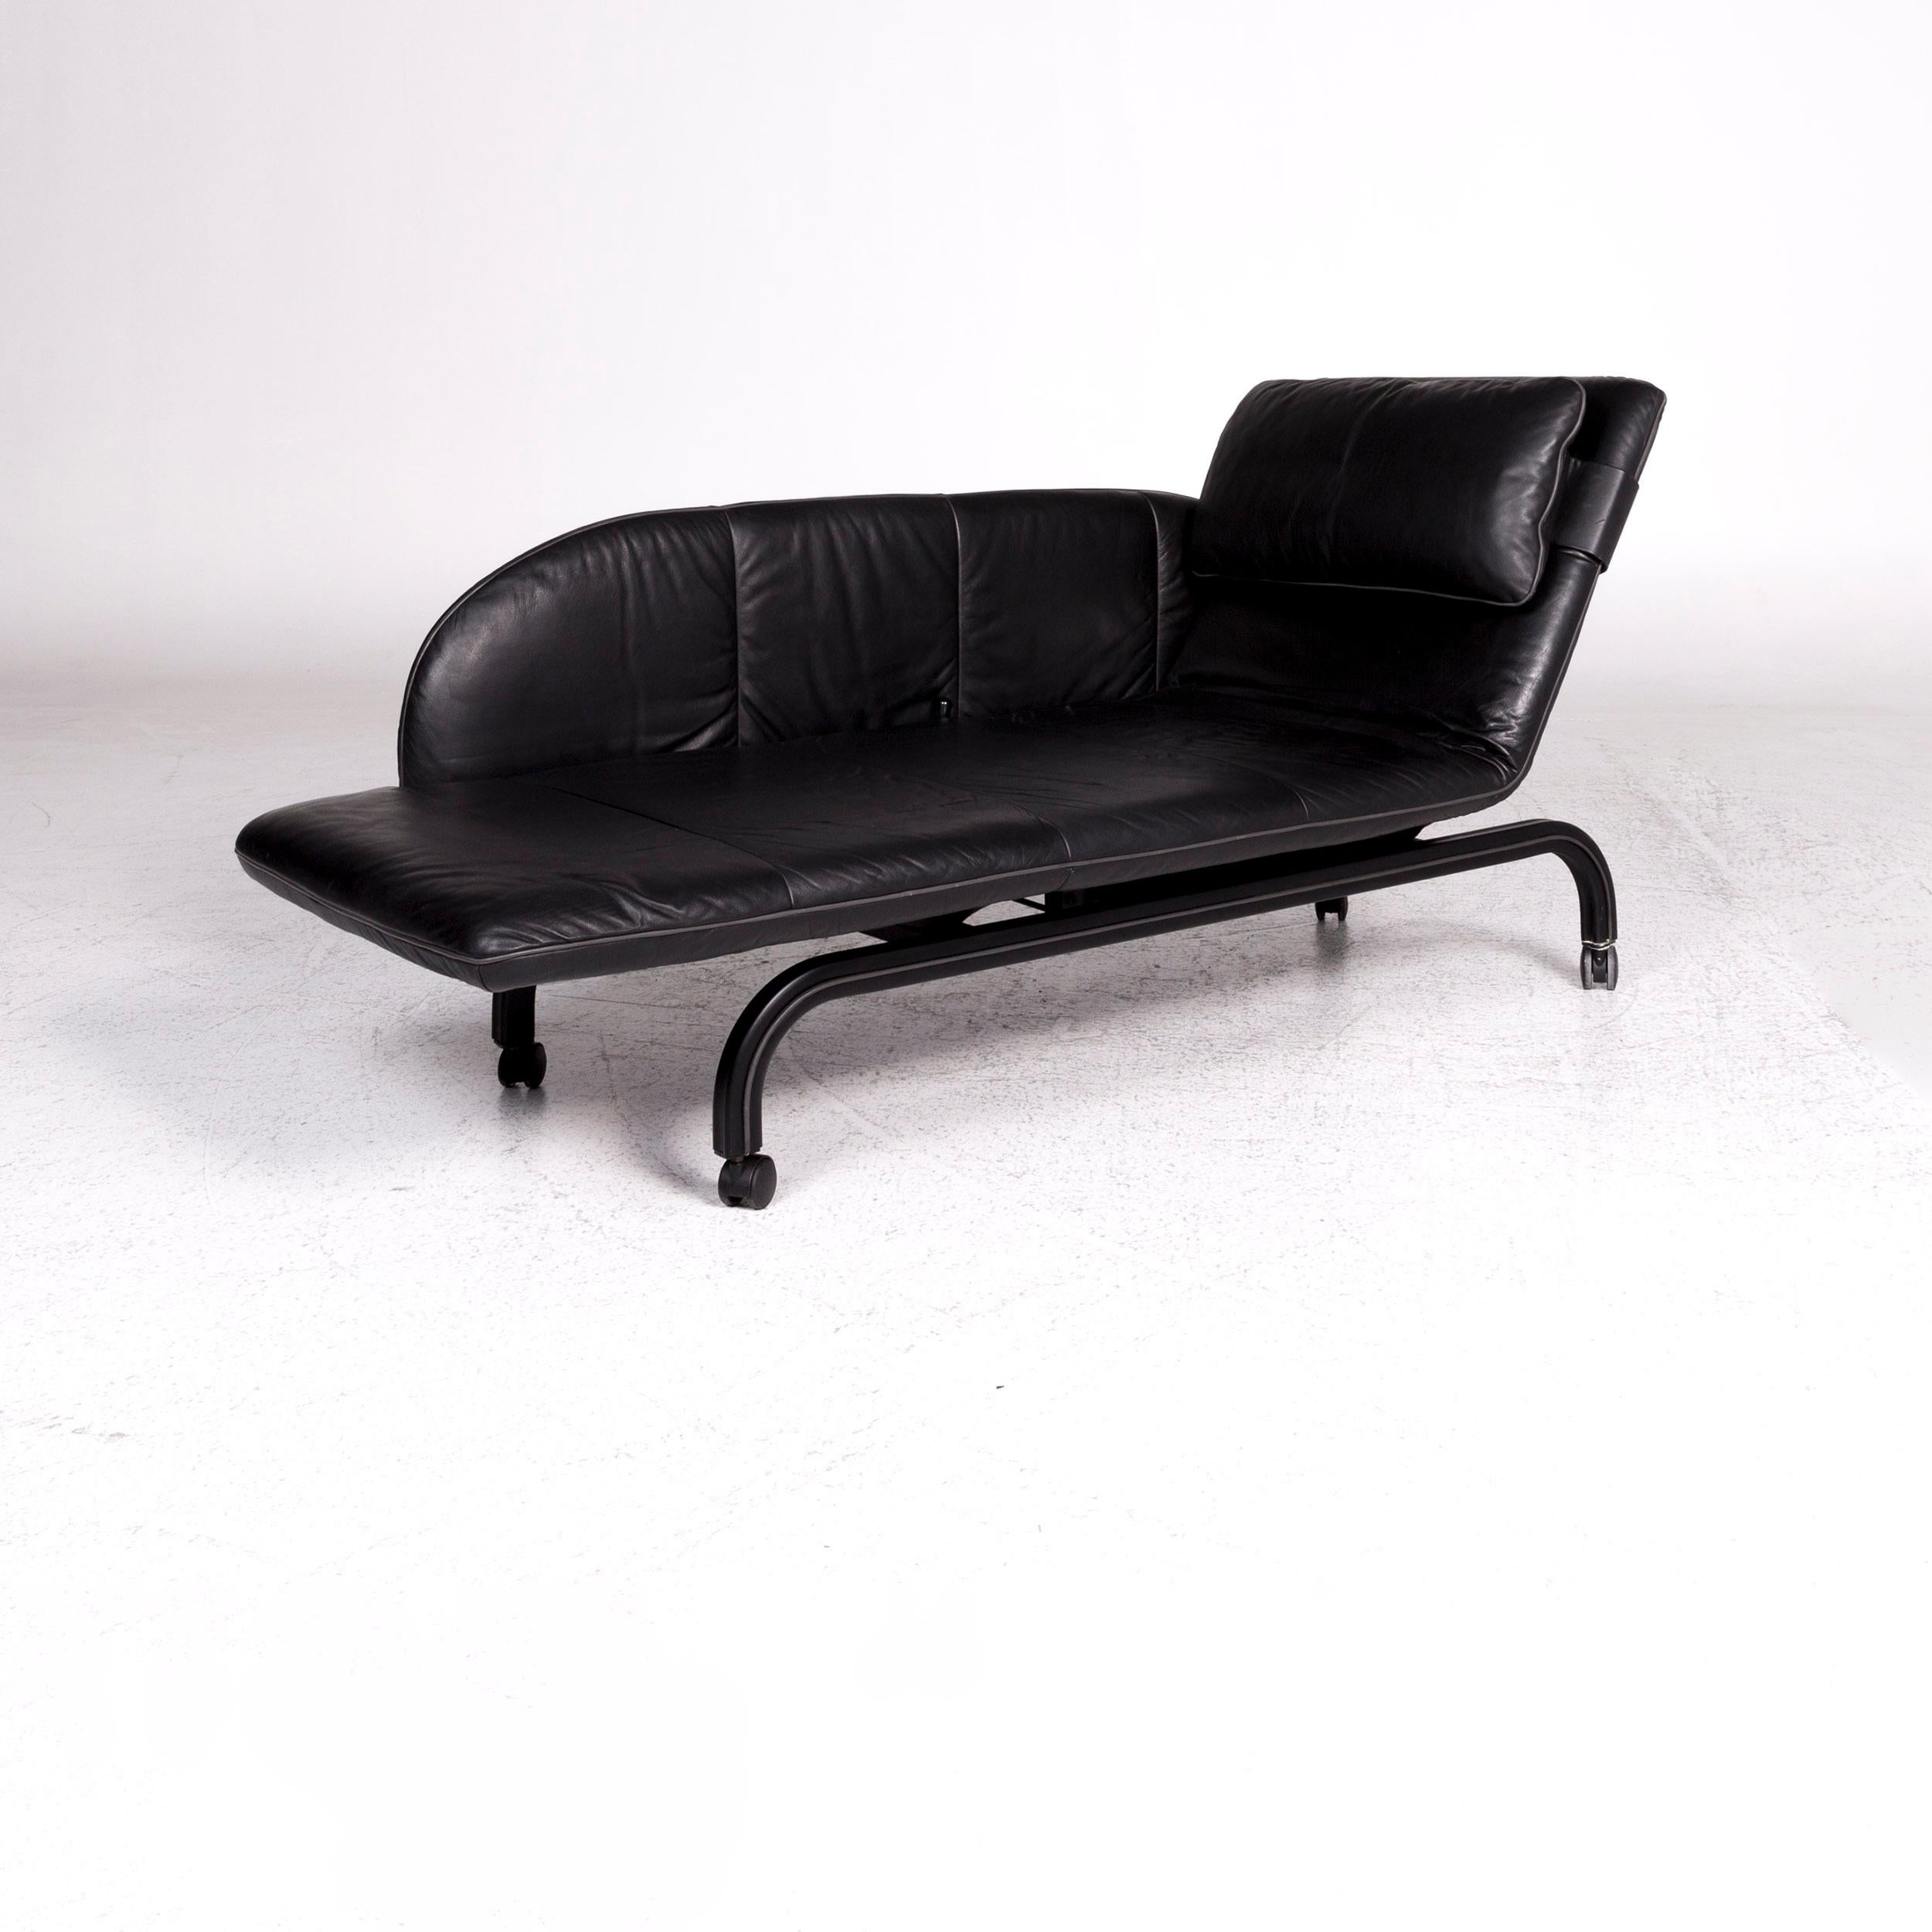 We bring to you an Interprofil Beo leather lounger black relax.


 Product measurements in centimeters:
 

Depth 82
Width 175
Height 70
Seat-height 39
Rest-height
Seat-depth 70
Seat-width 202
Back-height 31.
 